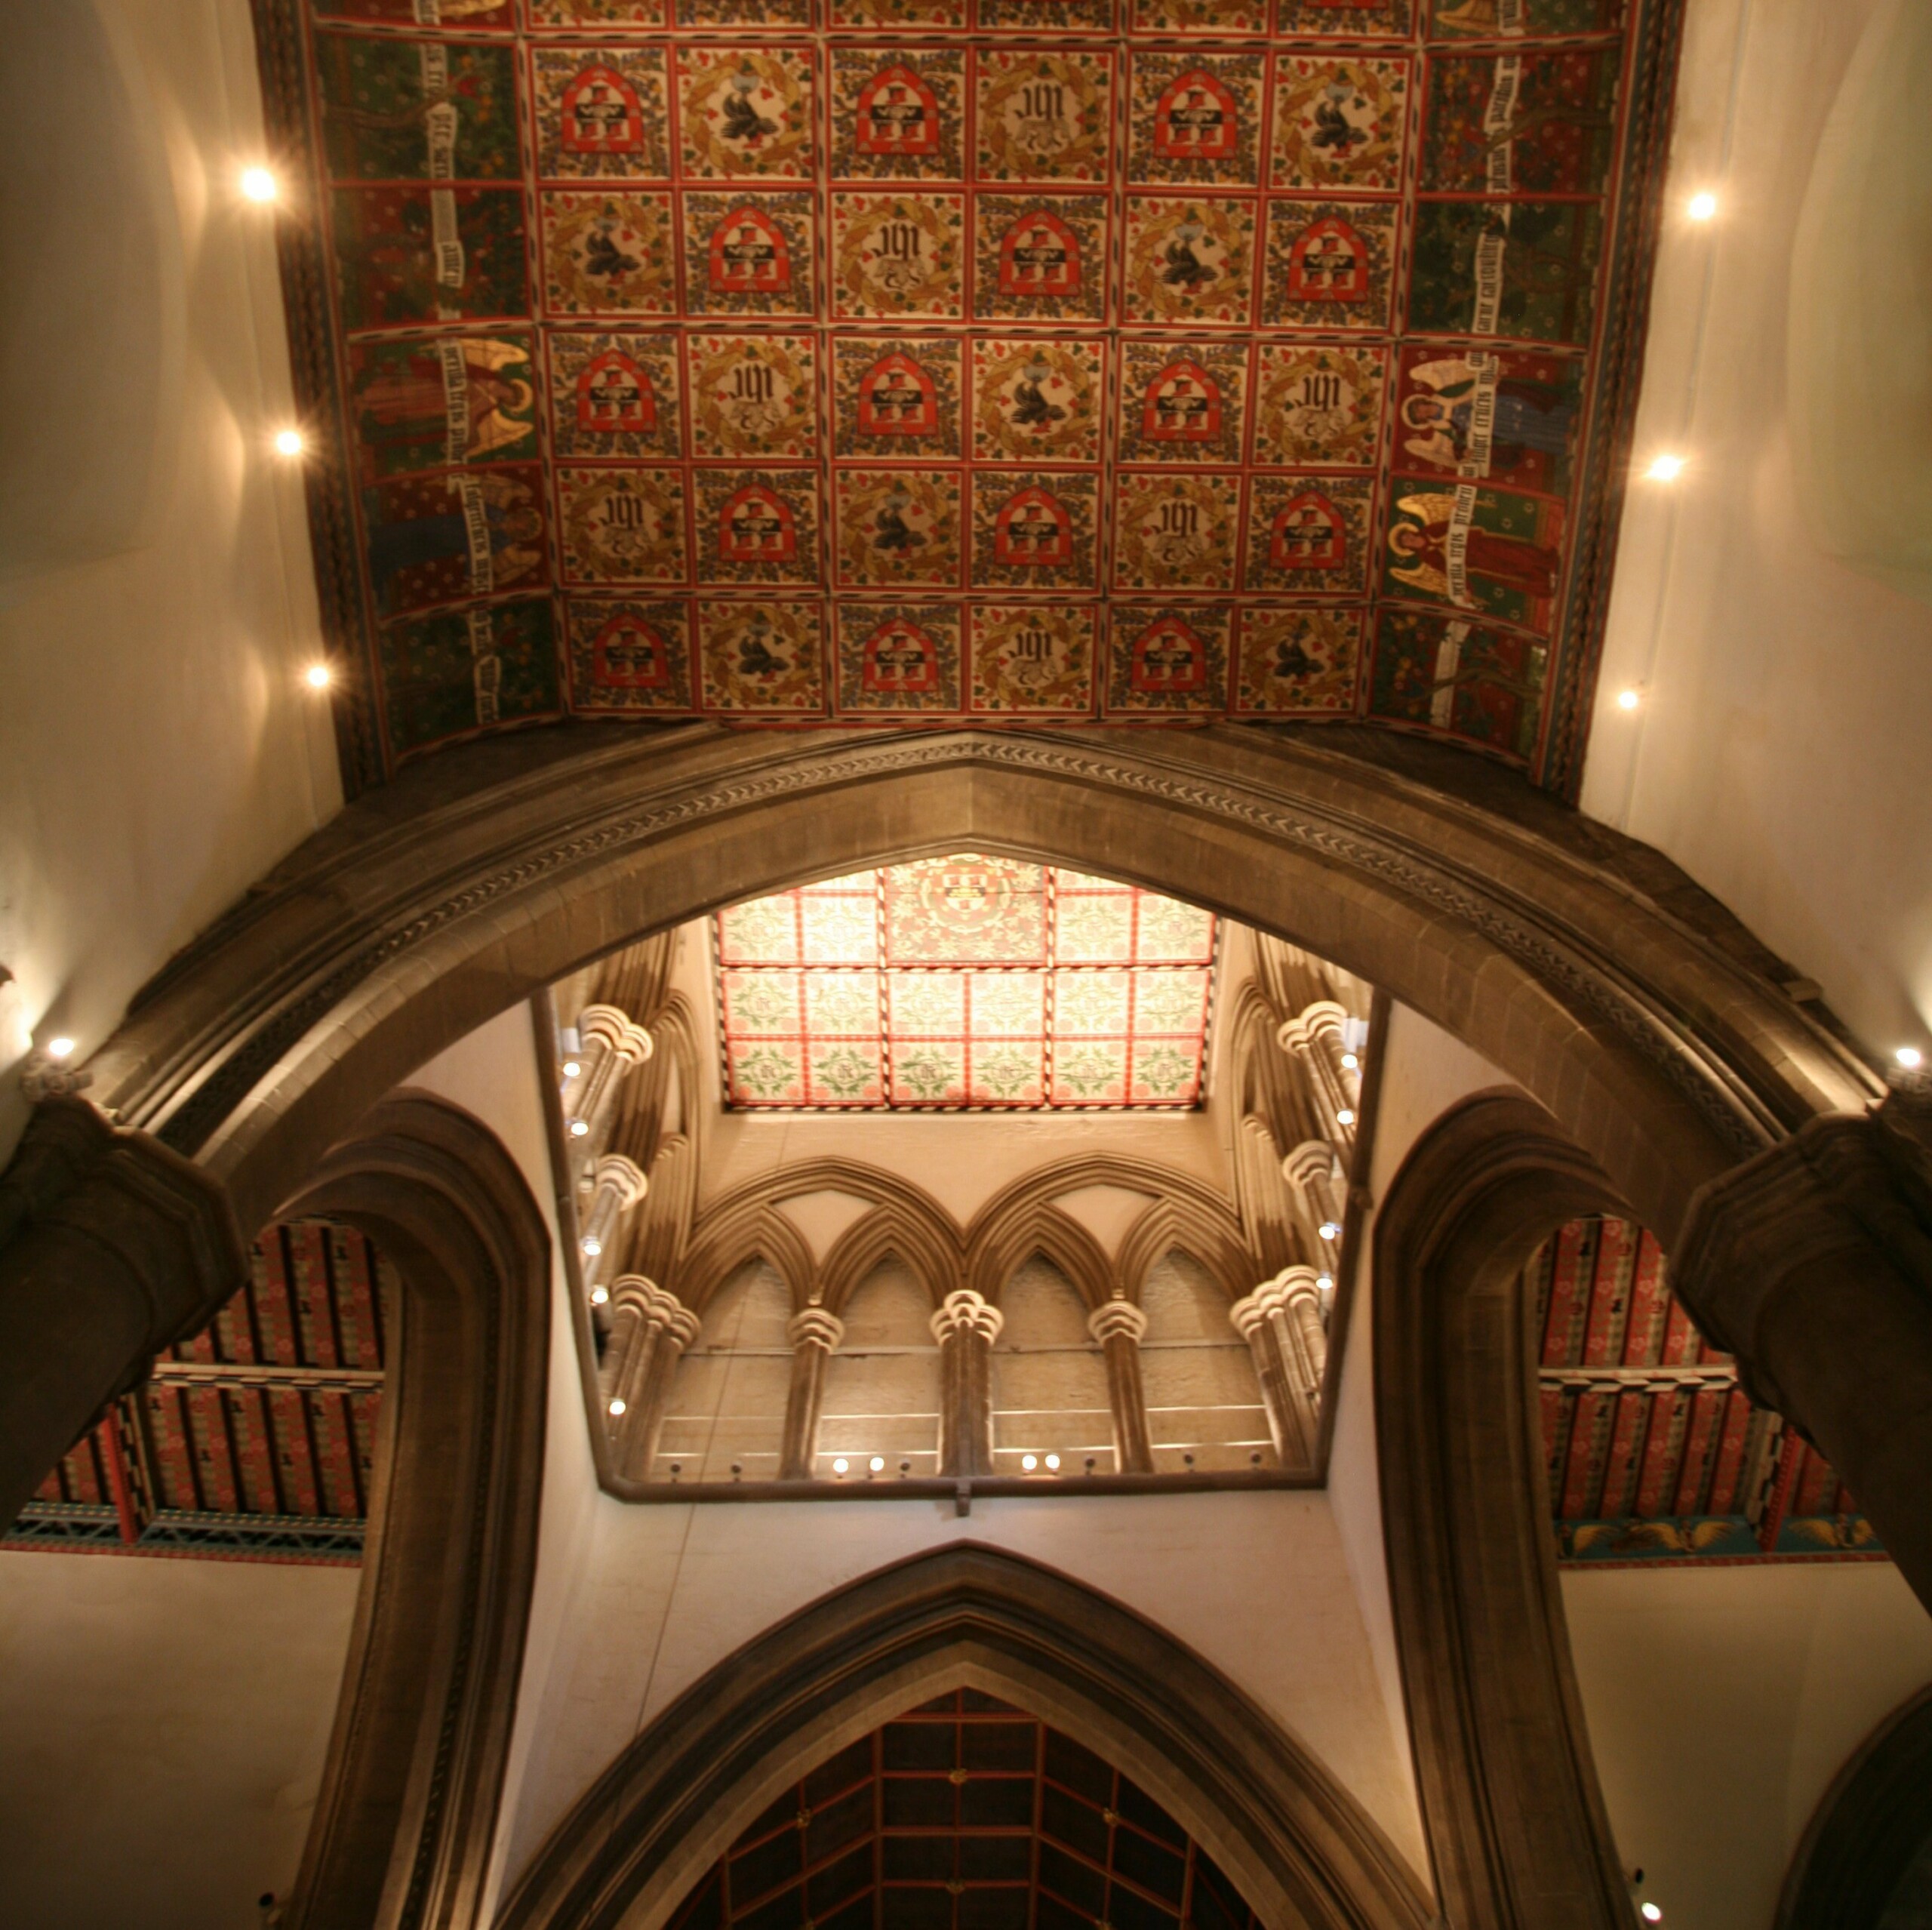 The decorative ceilings designed and executed by Morris working under Bodley are still in need of conservation, but are shown to better advantage by the new lighting.